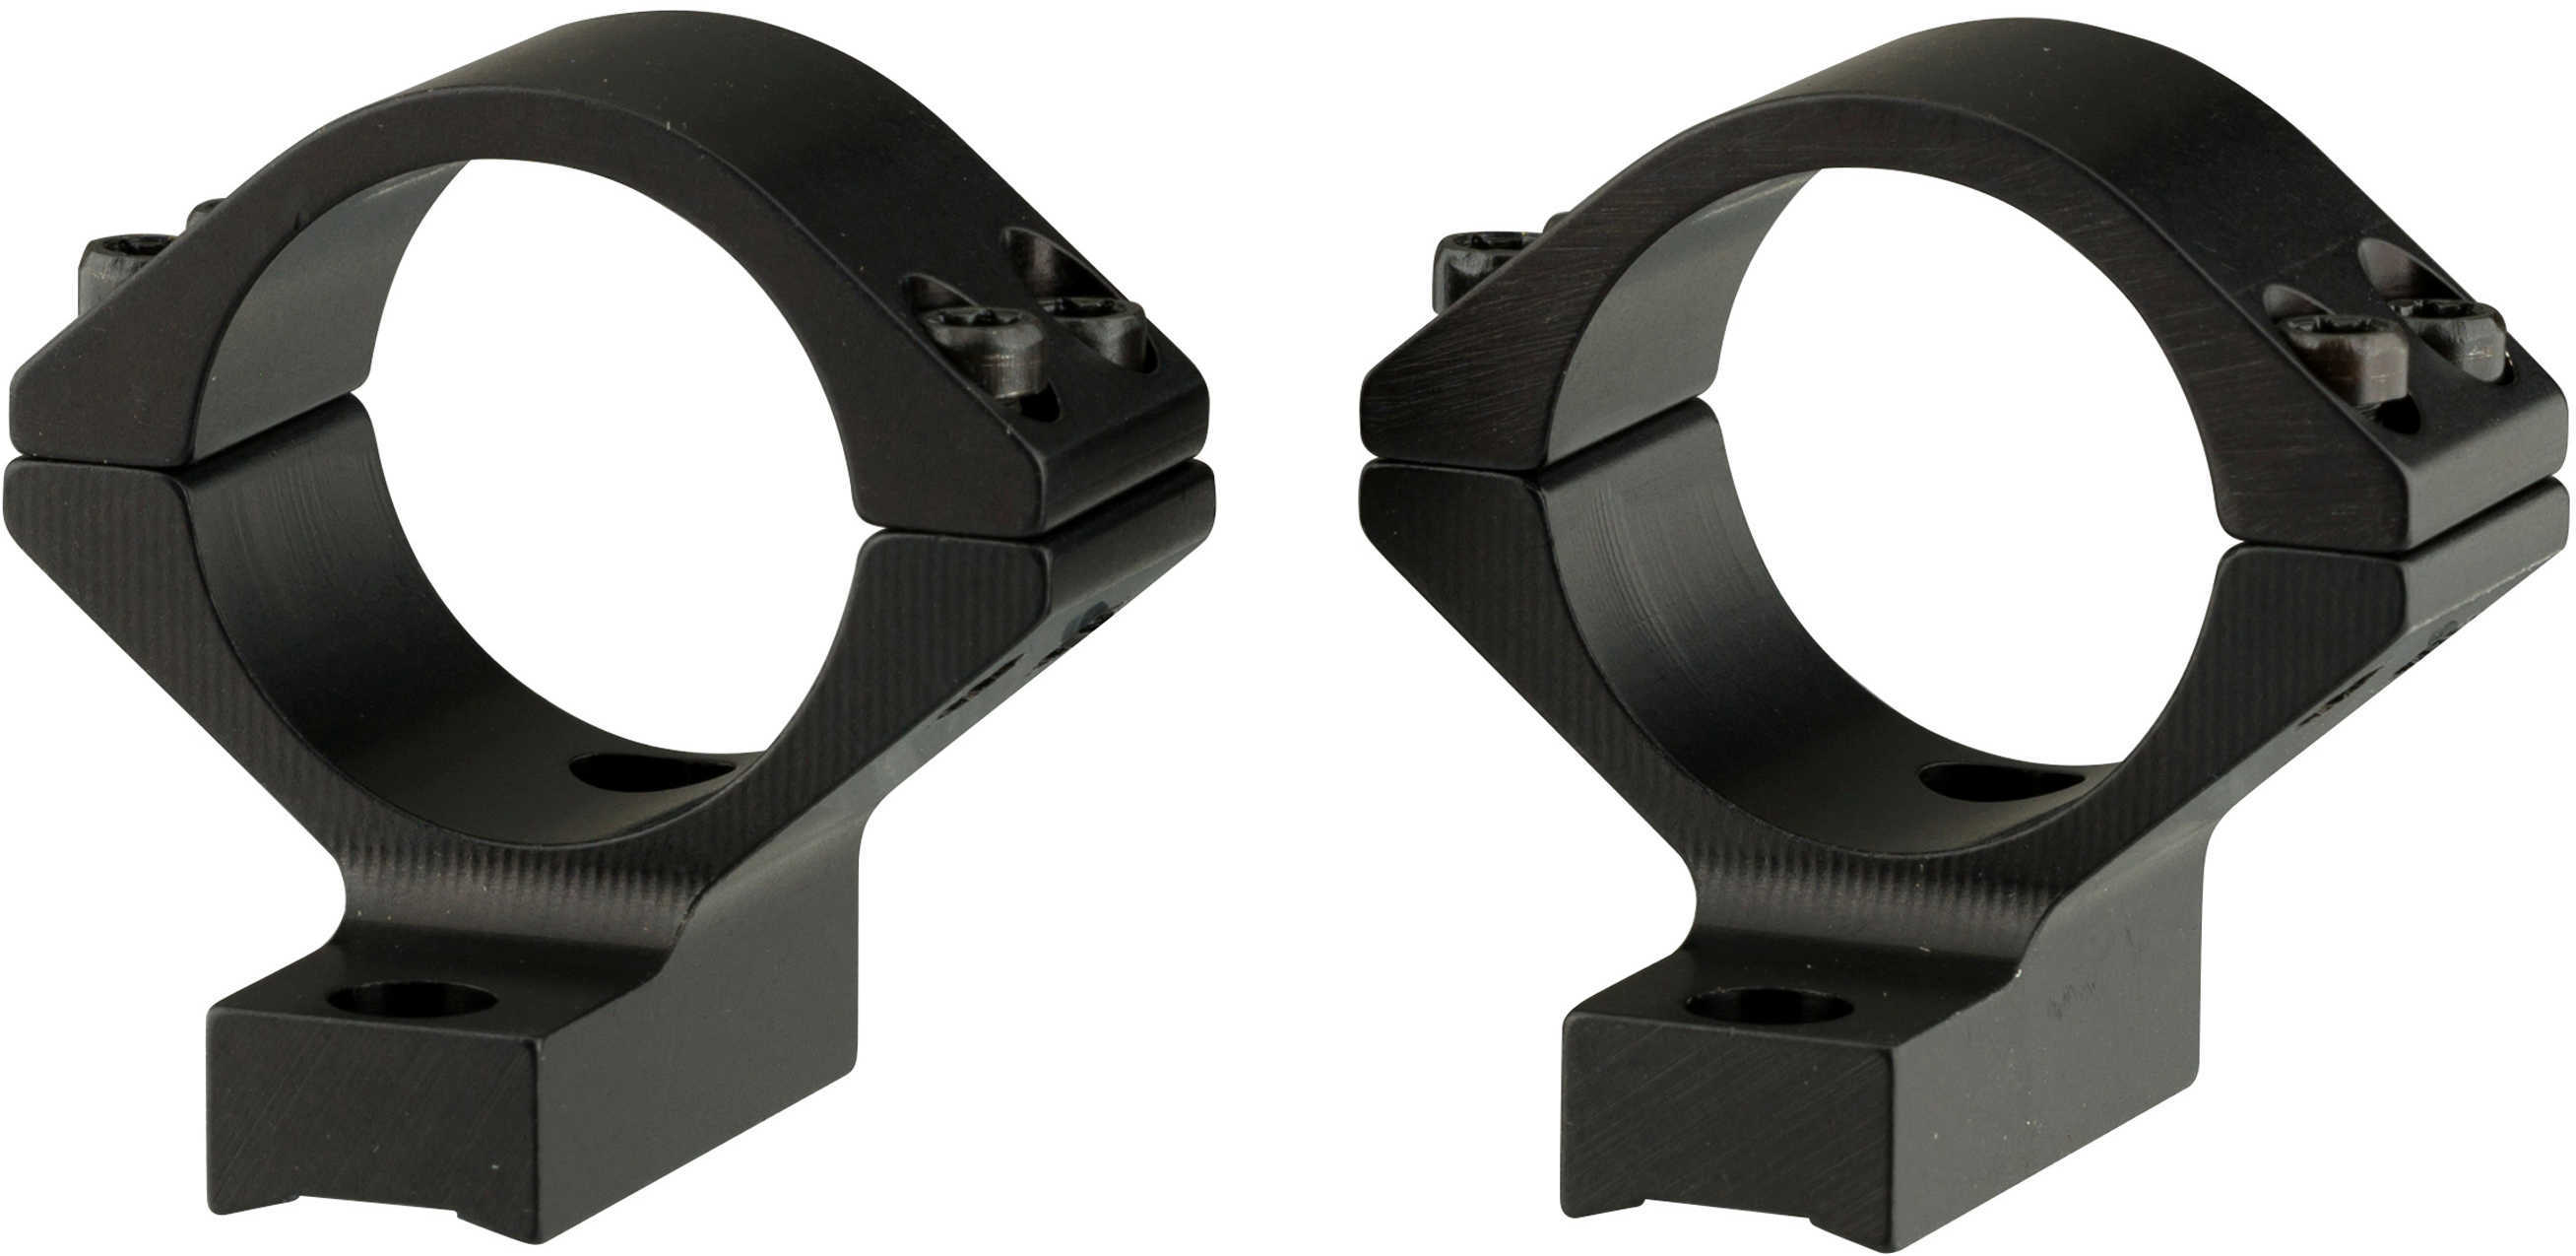 Browning Ab3 Integrated Scope Mount System 30mm Ring Diameter Standard Height Matte Black Md: 123011